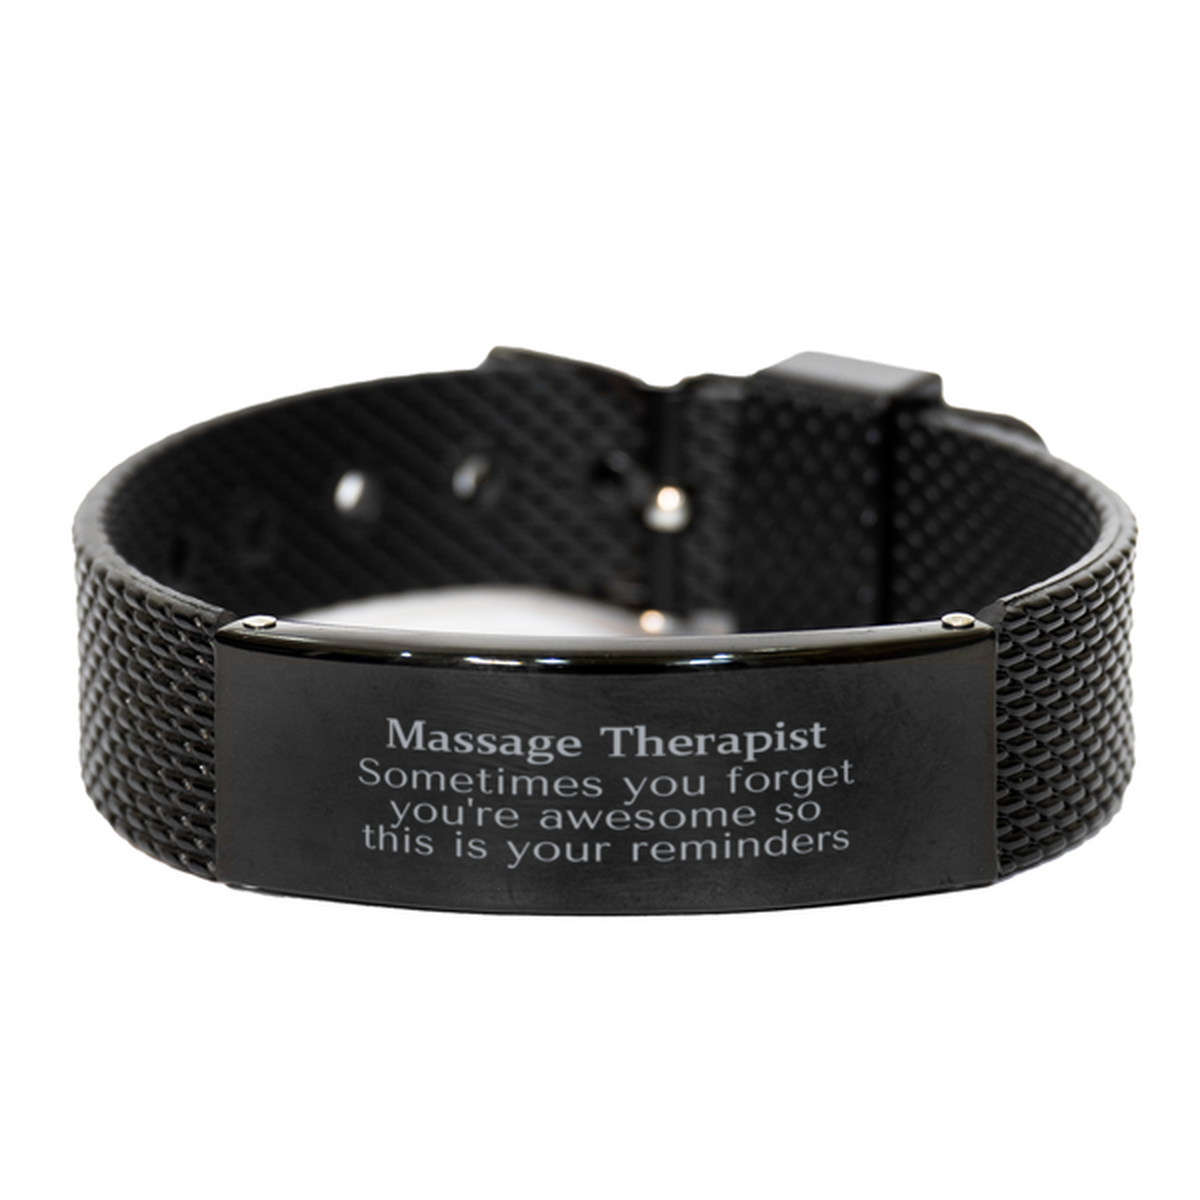 Sentimental Massage Therapist Black Shark Mesh Bracelet, Massage Therapist Sometimes you forget you're awesome so this is your reminders, Graduation Christmas Birthday Gifts for Massage Therapist, Men, Women, Coworkers